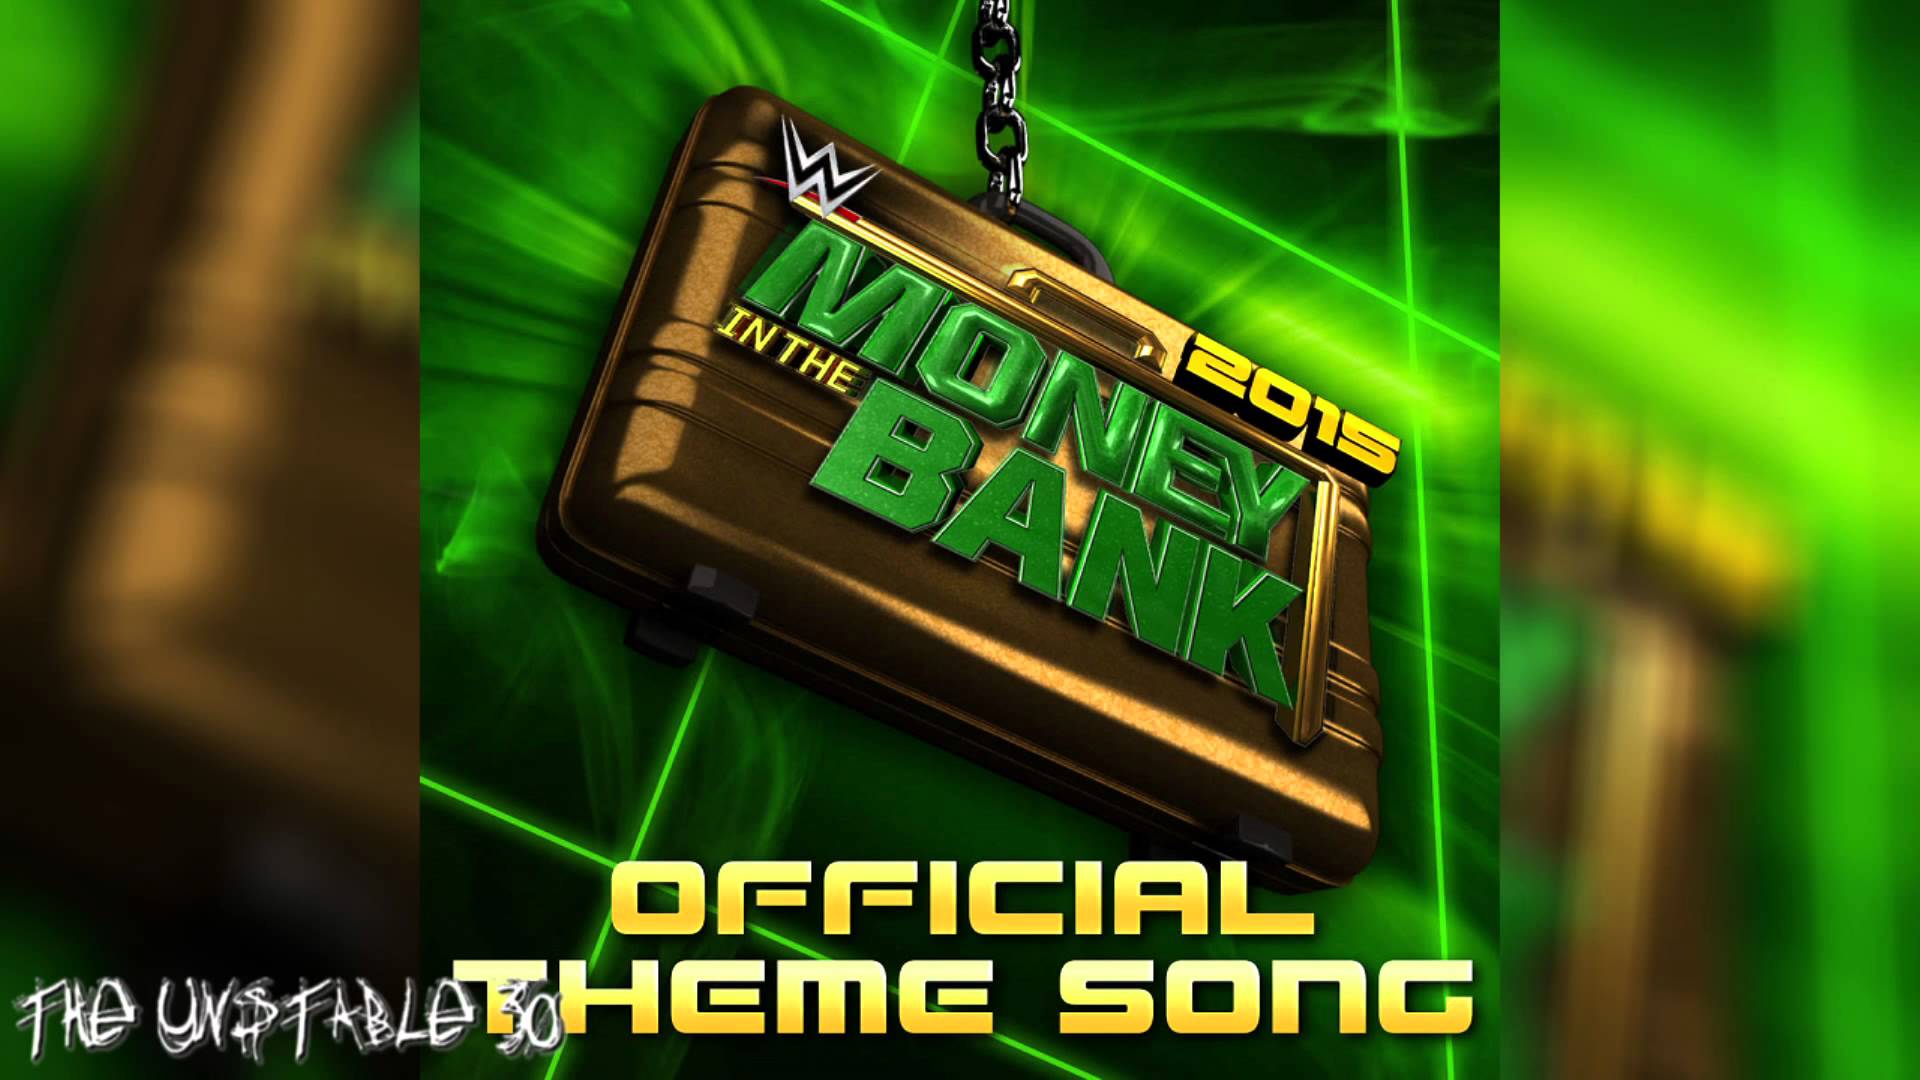 Gta 5 money in the bank song фото 23